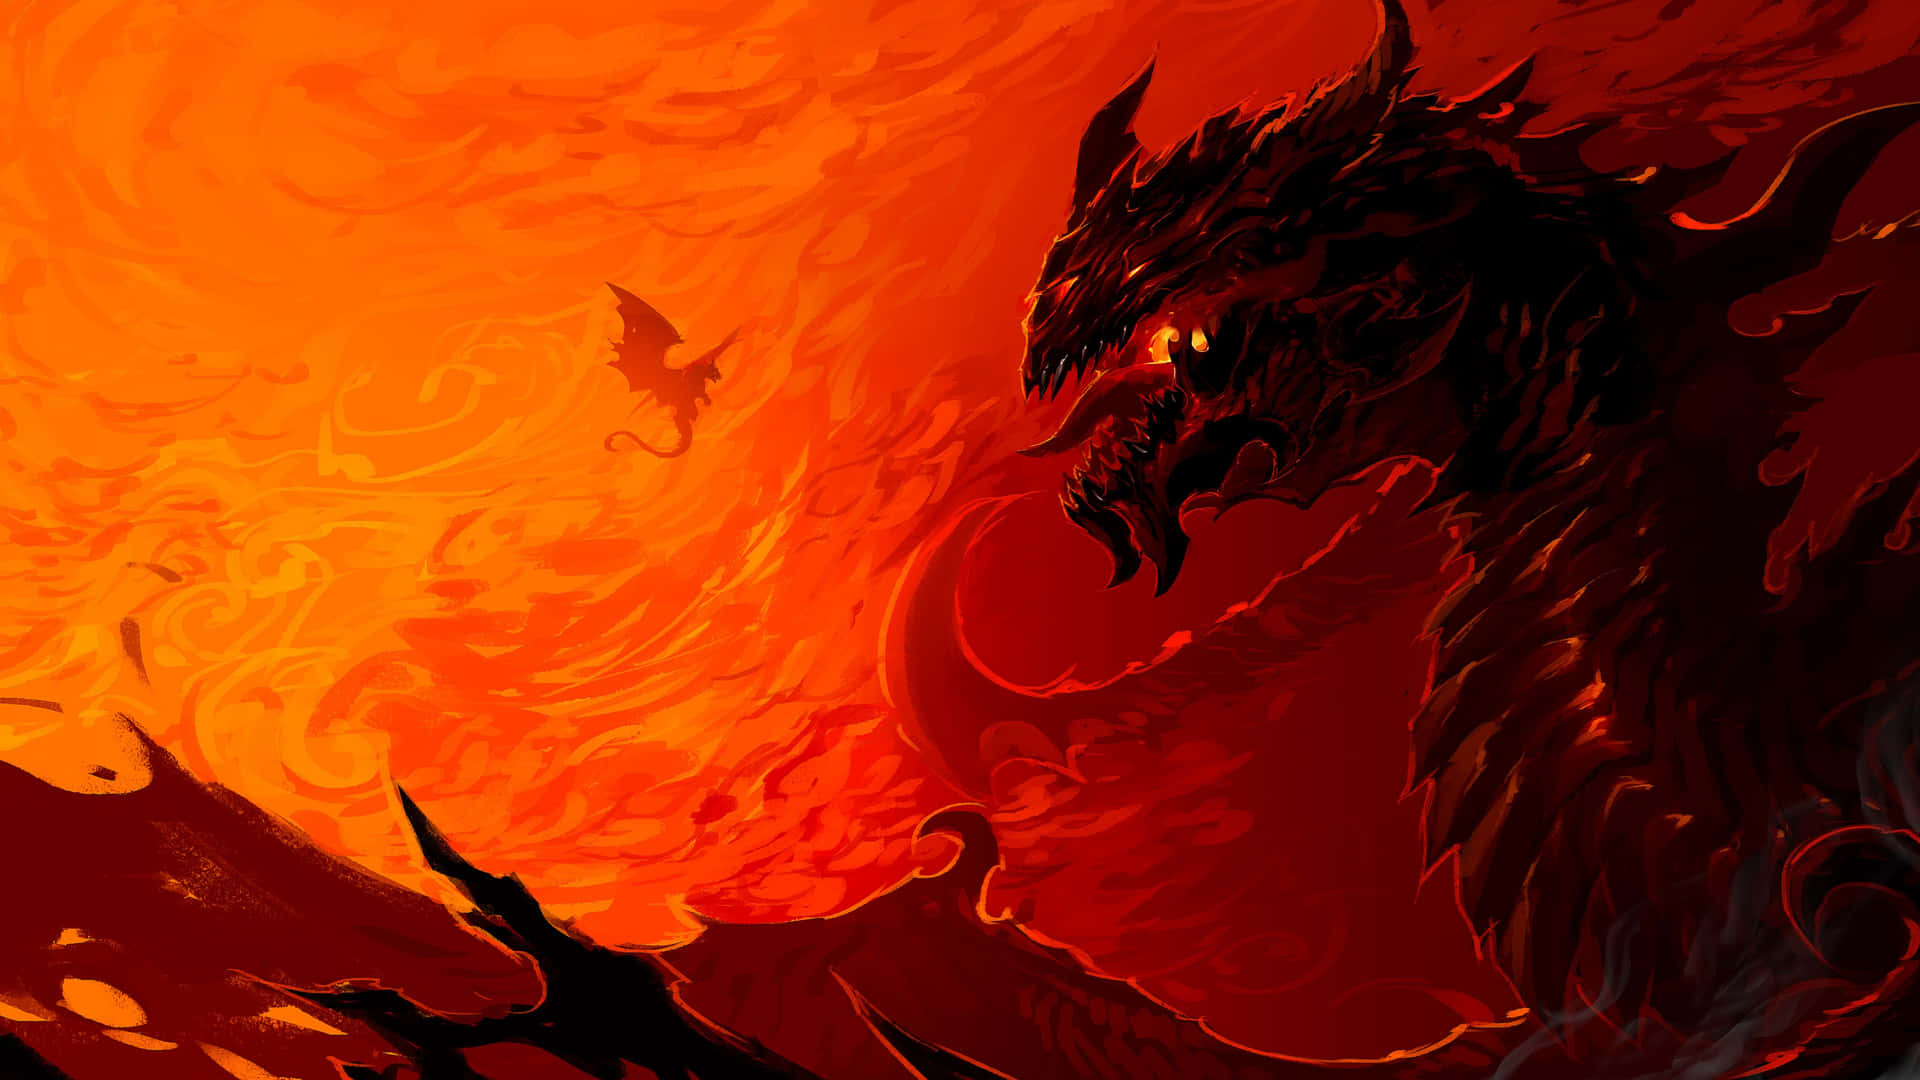 A Black Dragon With Flames And Fire Wallpaper